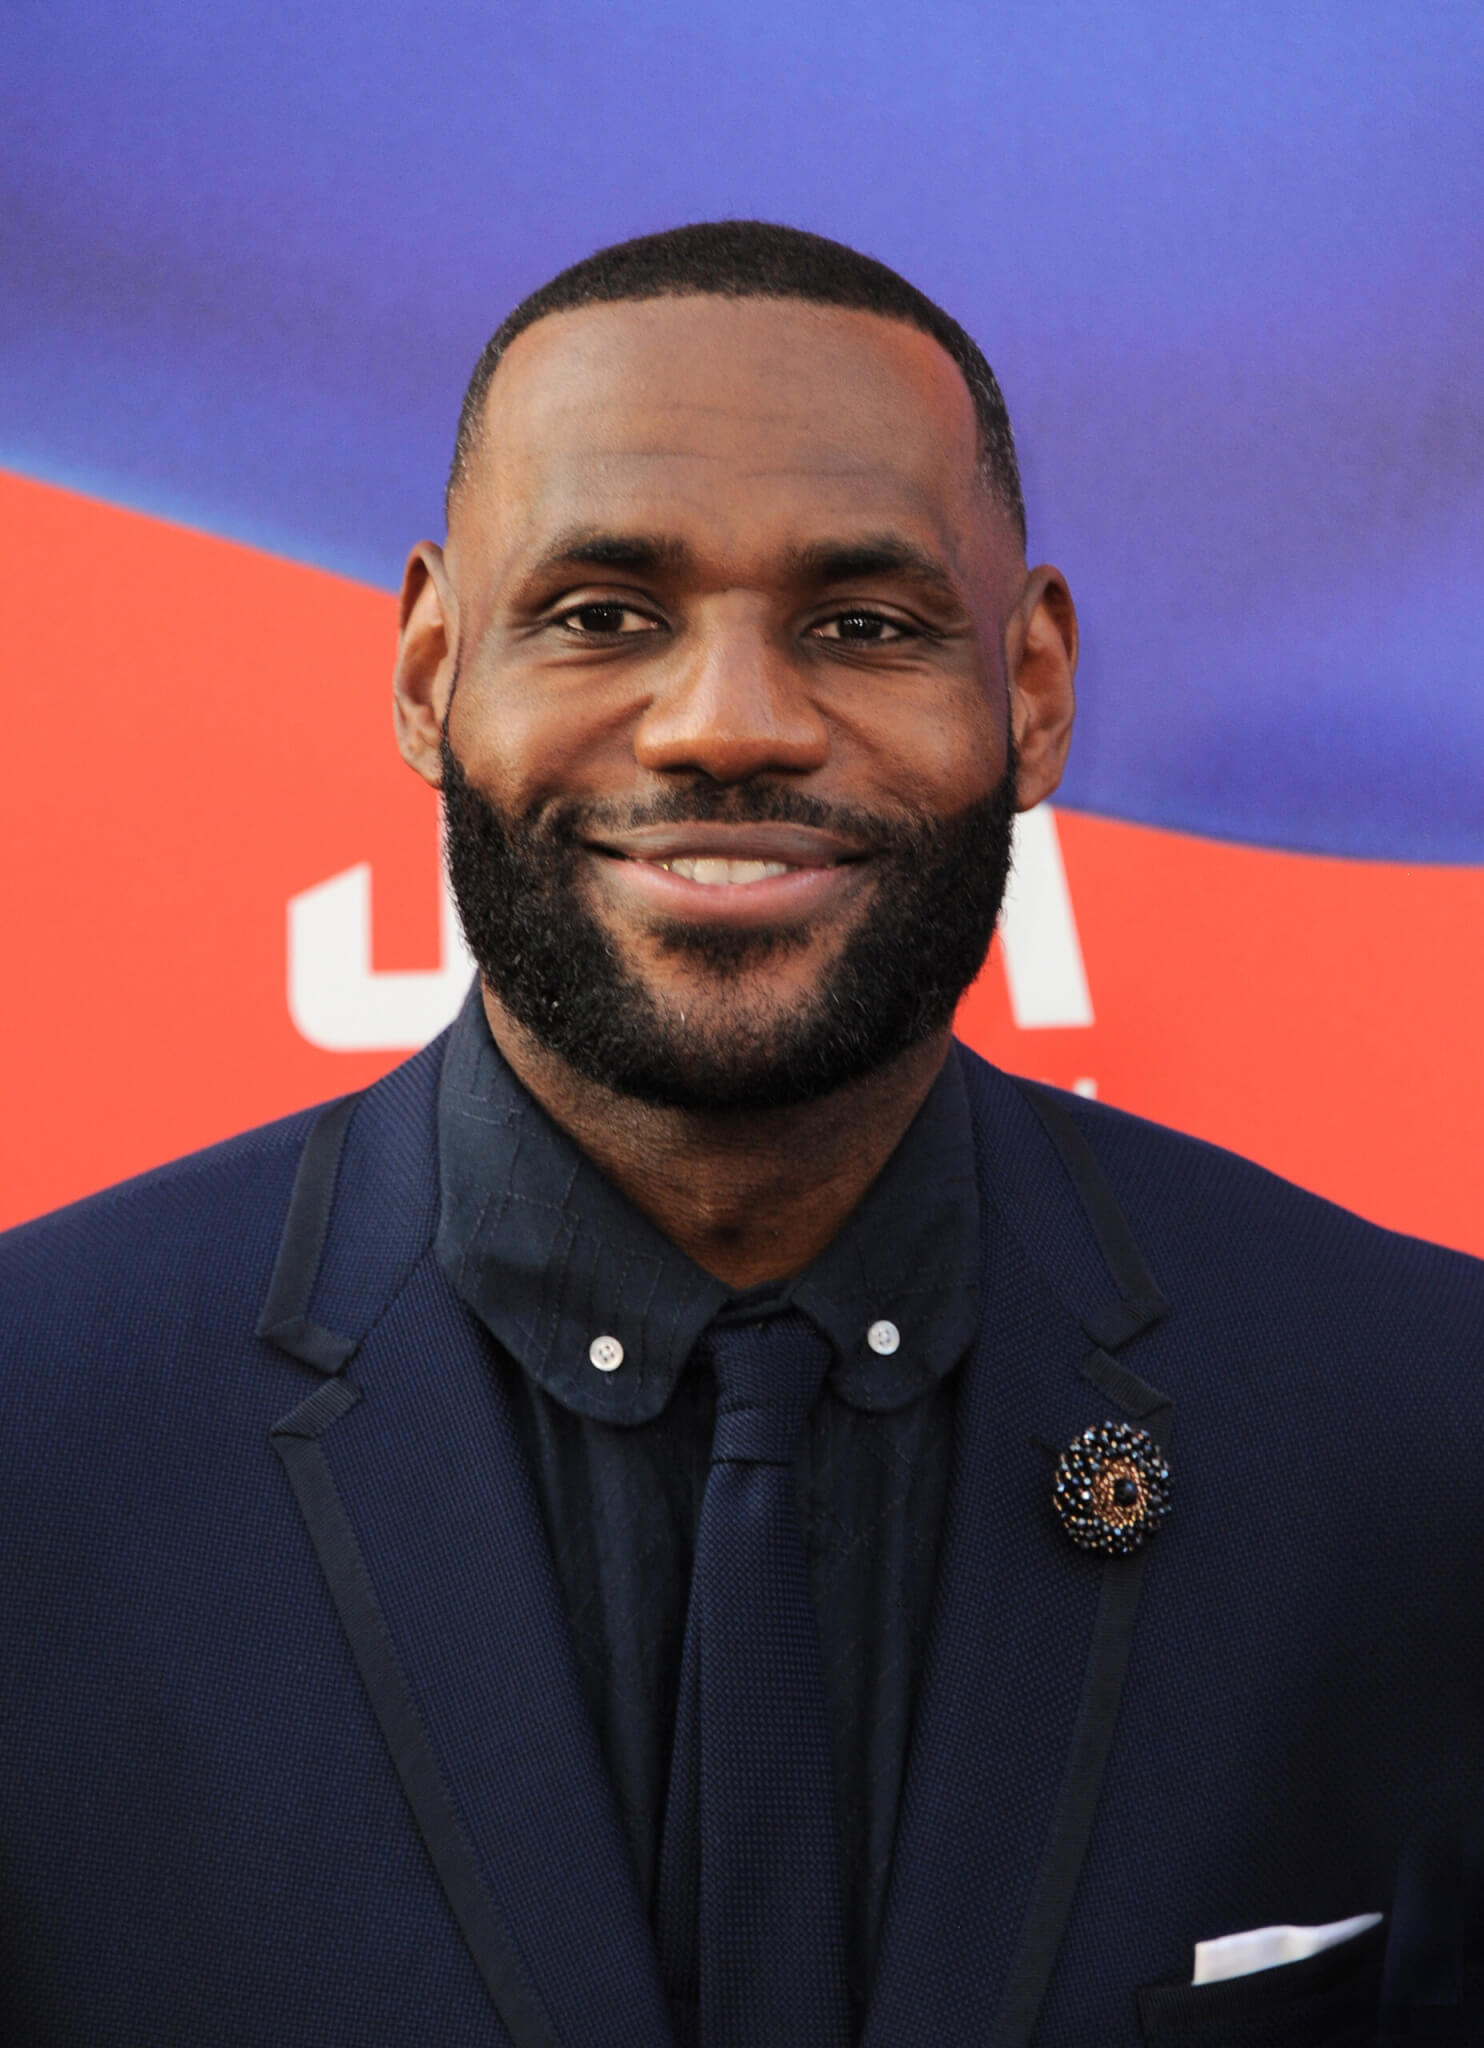 LeBron James at the premiere of "Space Jam: A New Legacy" in Los Angeles 2021